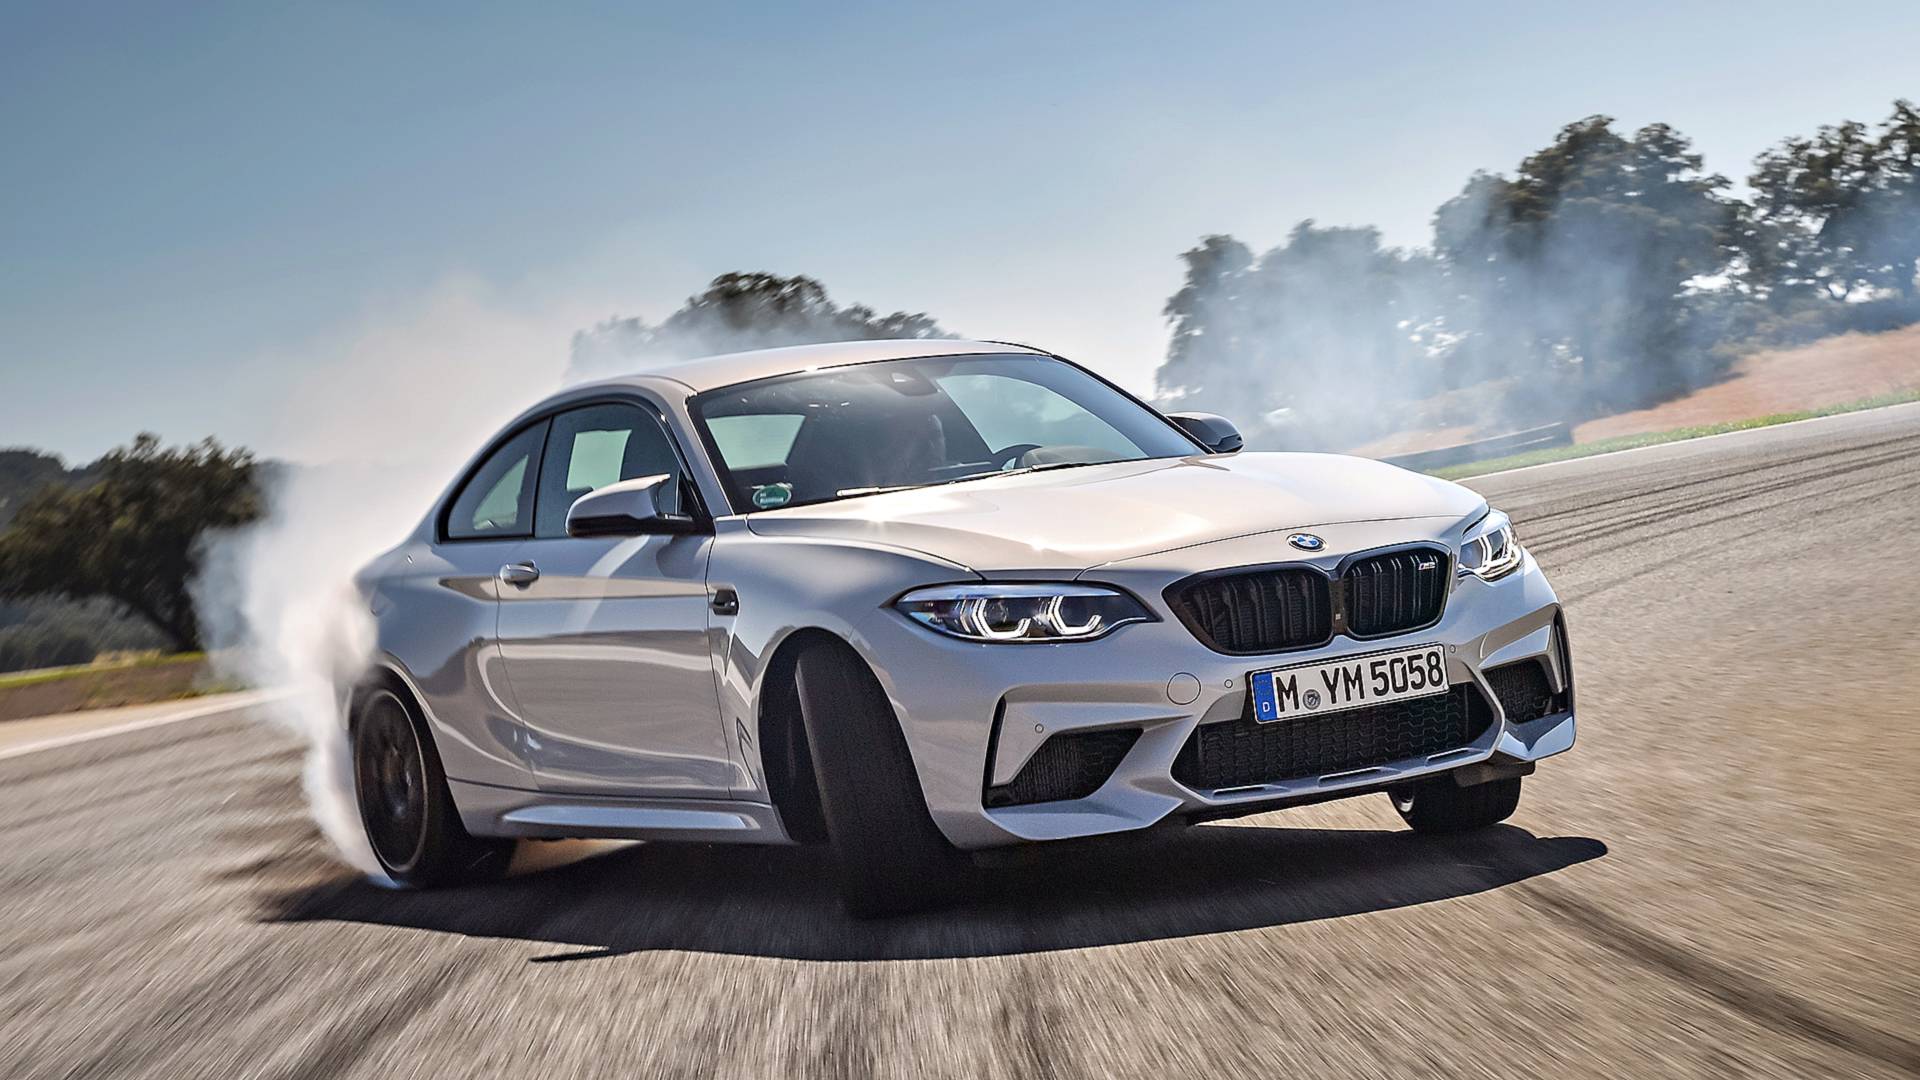 2019 BMW M2 First Drive: When The Tail Wags The Dog